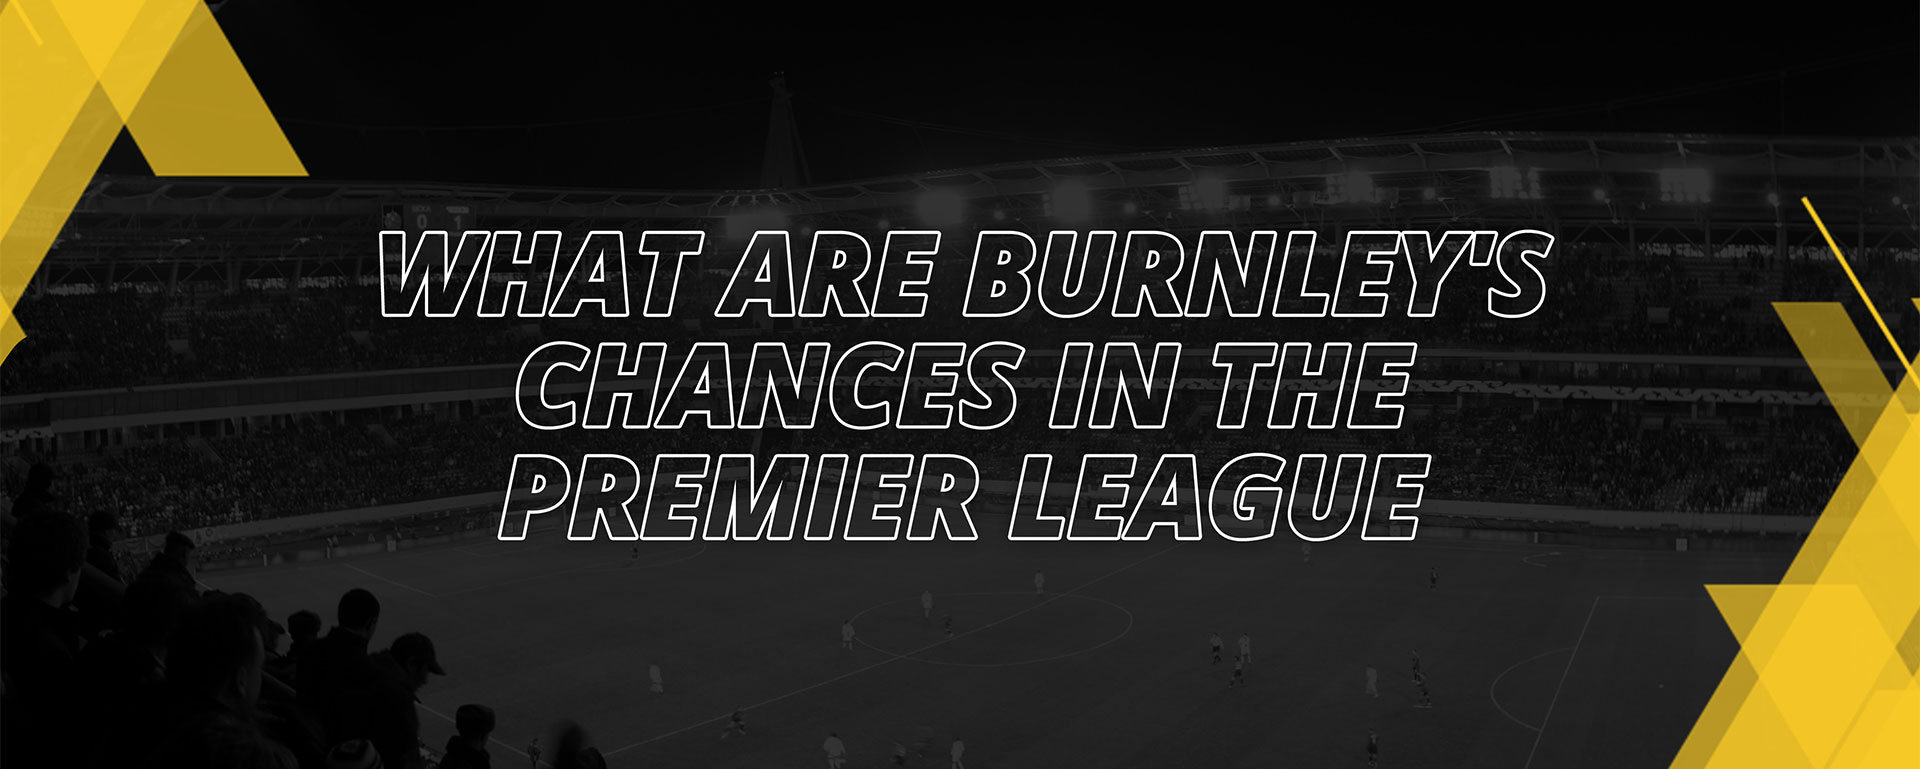 WHAT ARE BURNLEY’S CHANCES IN THE PREMIER LEAGUE